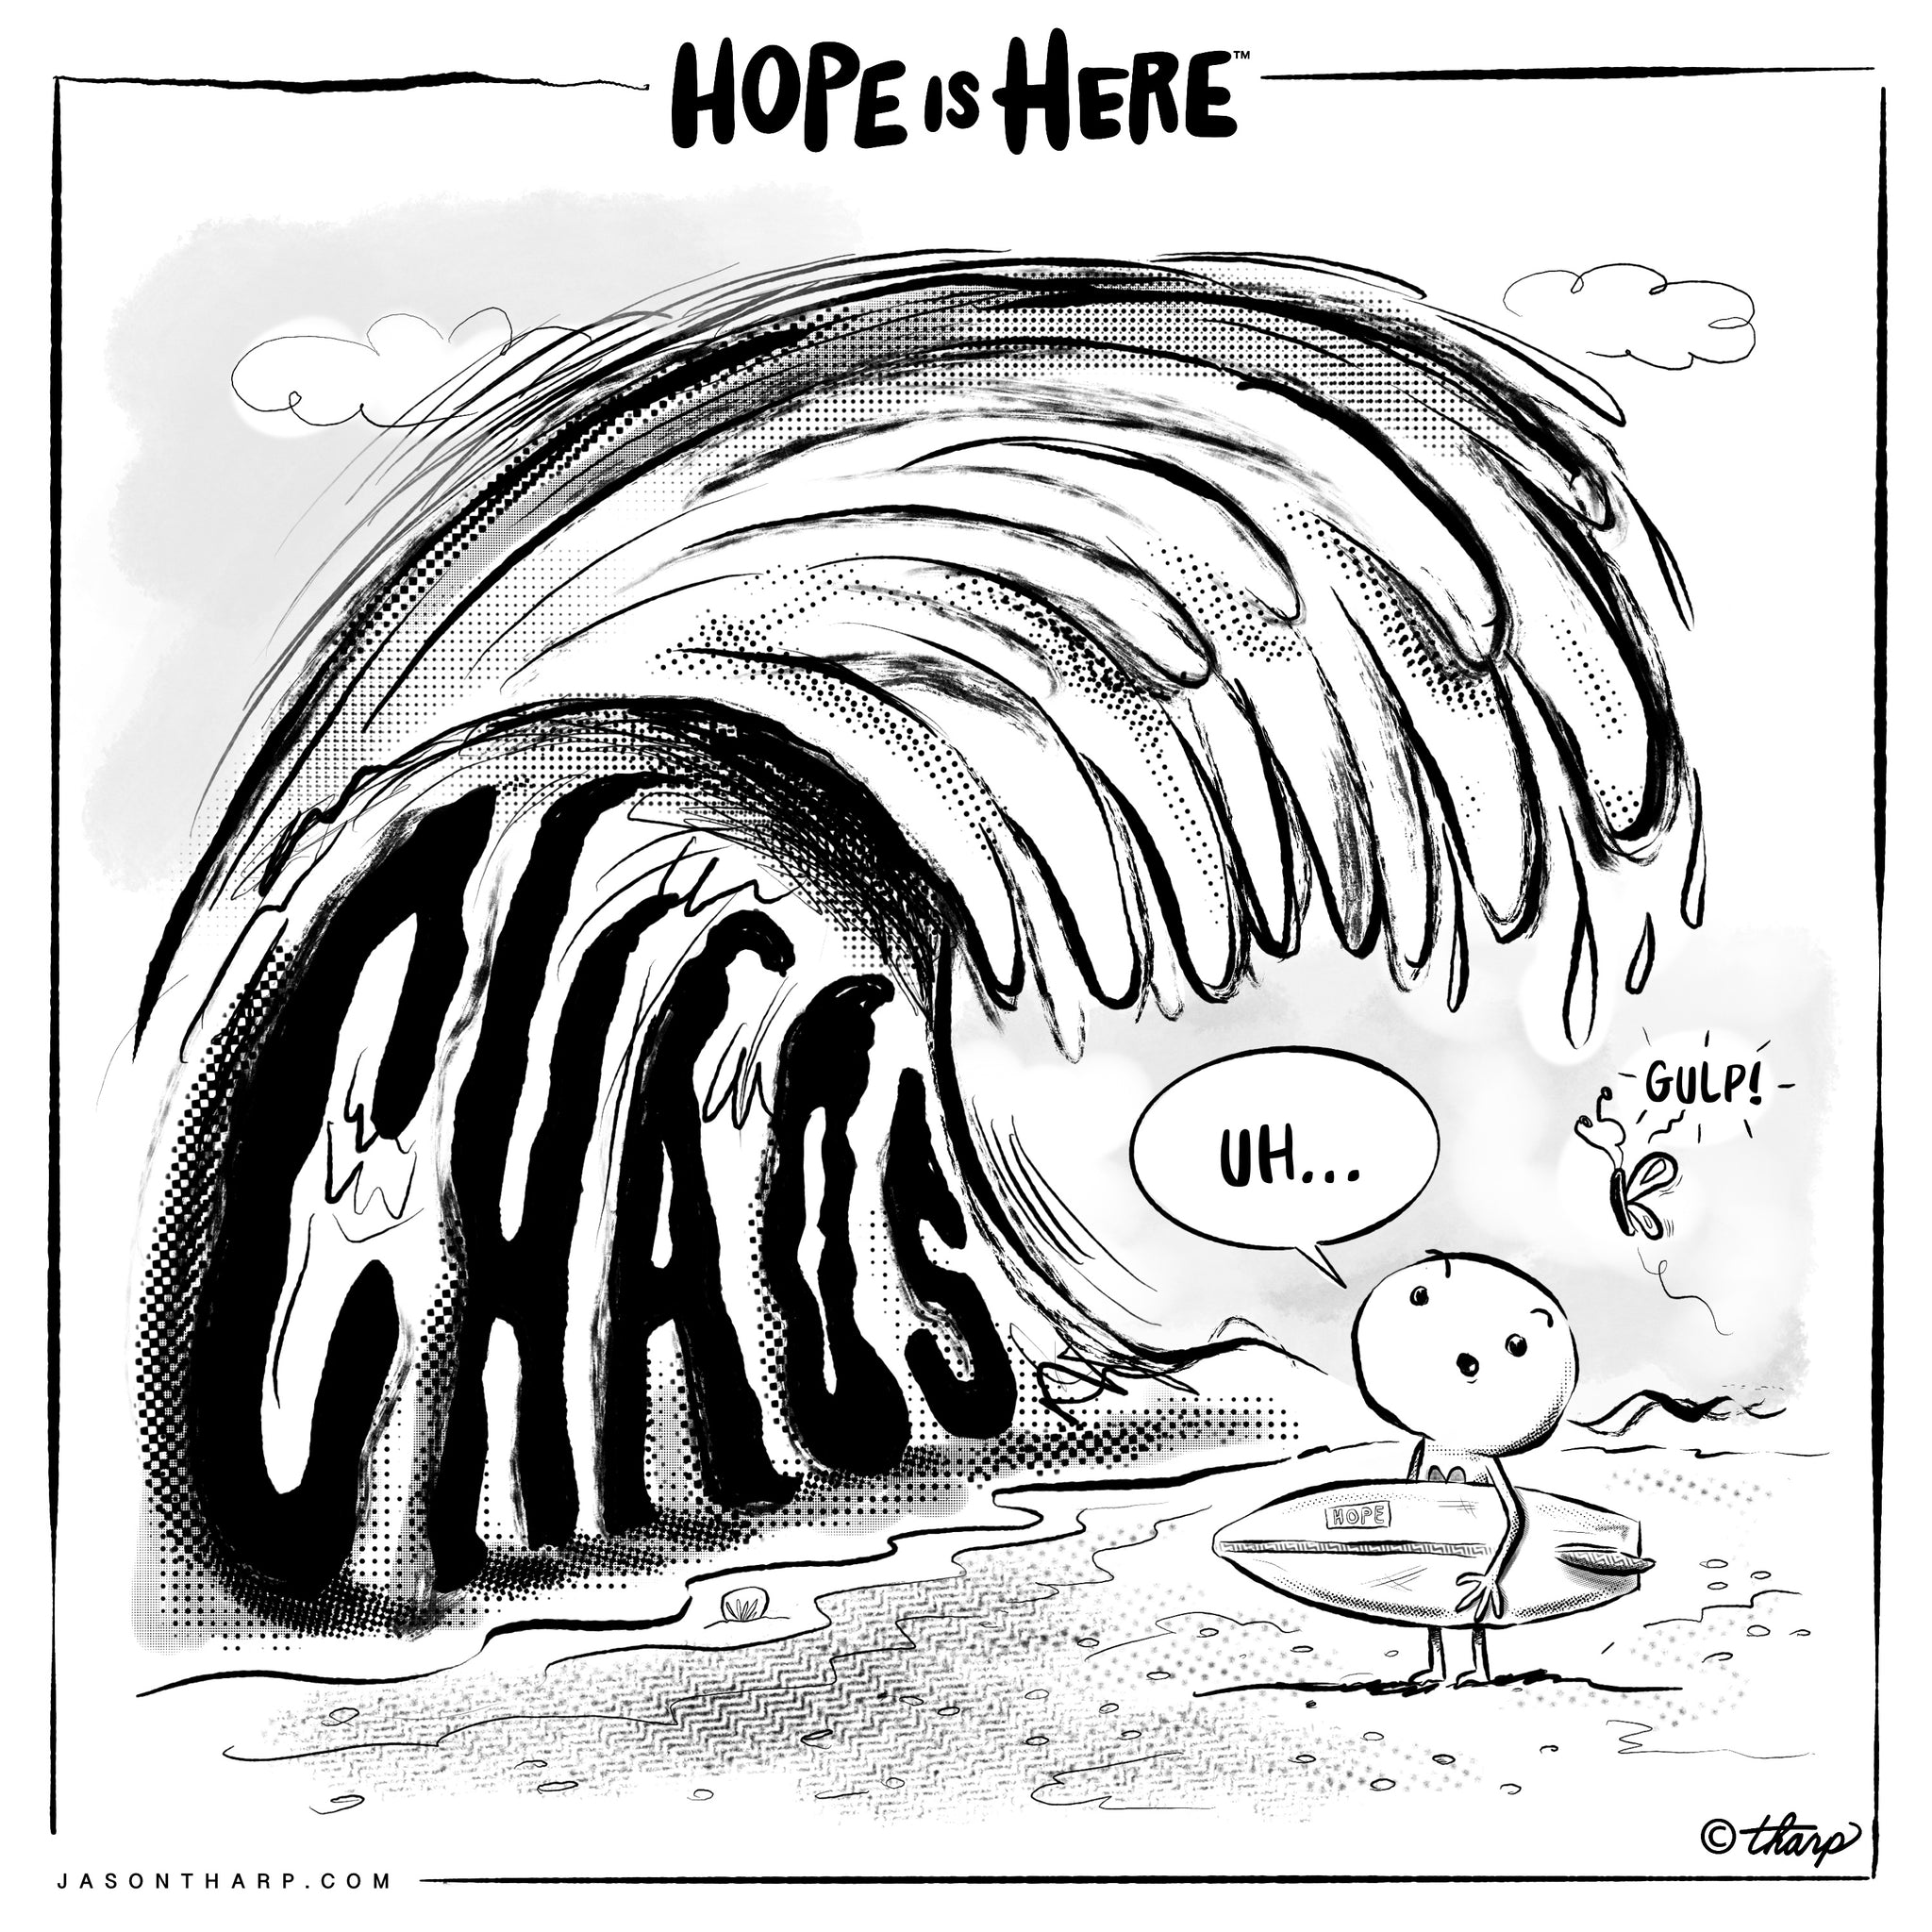 Hope Is Here™ | Beyond Hope Project, Hope character holding surf board with wave of chaos about to plow them over